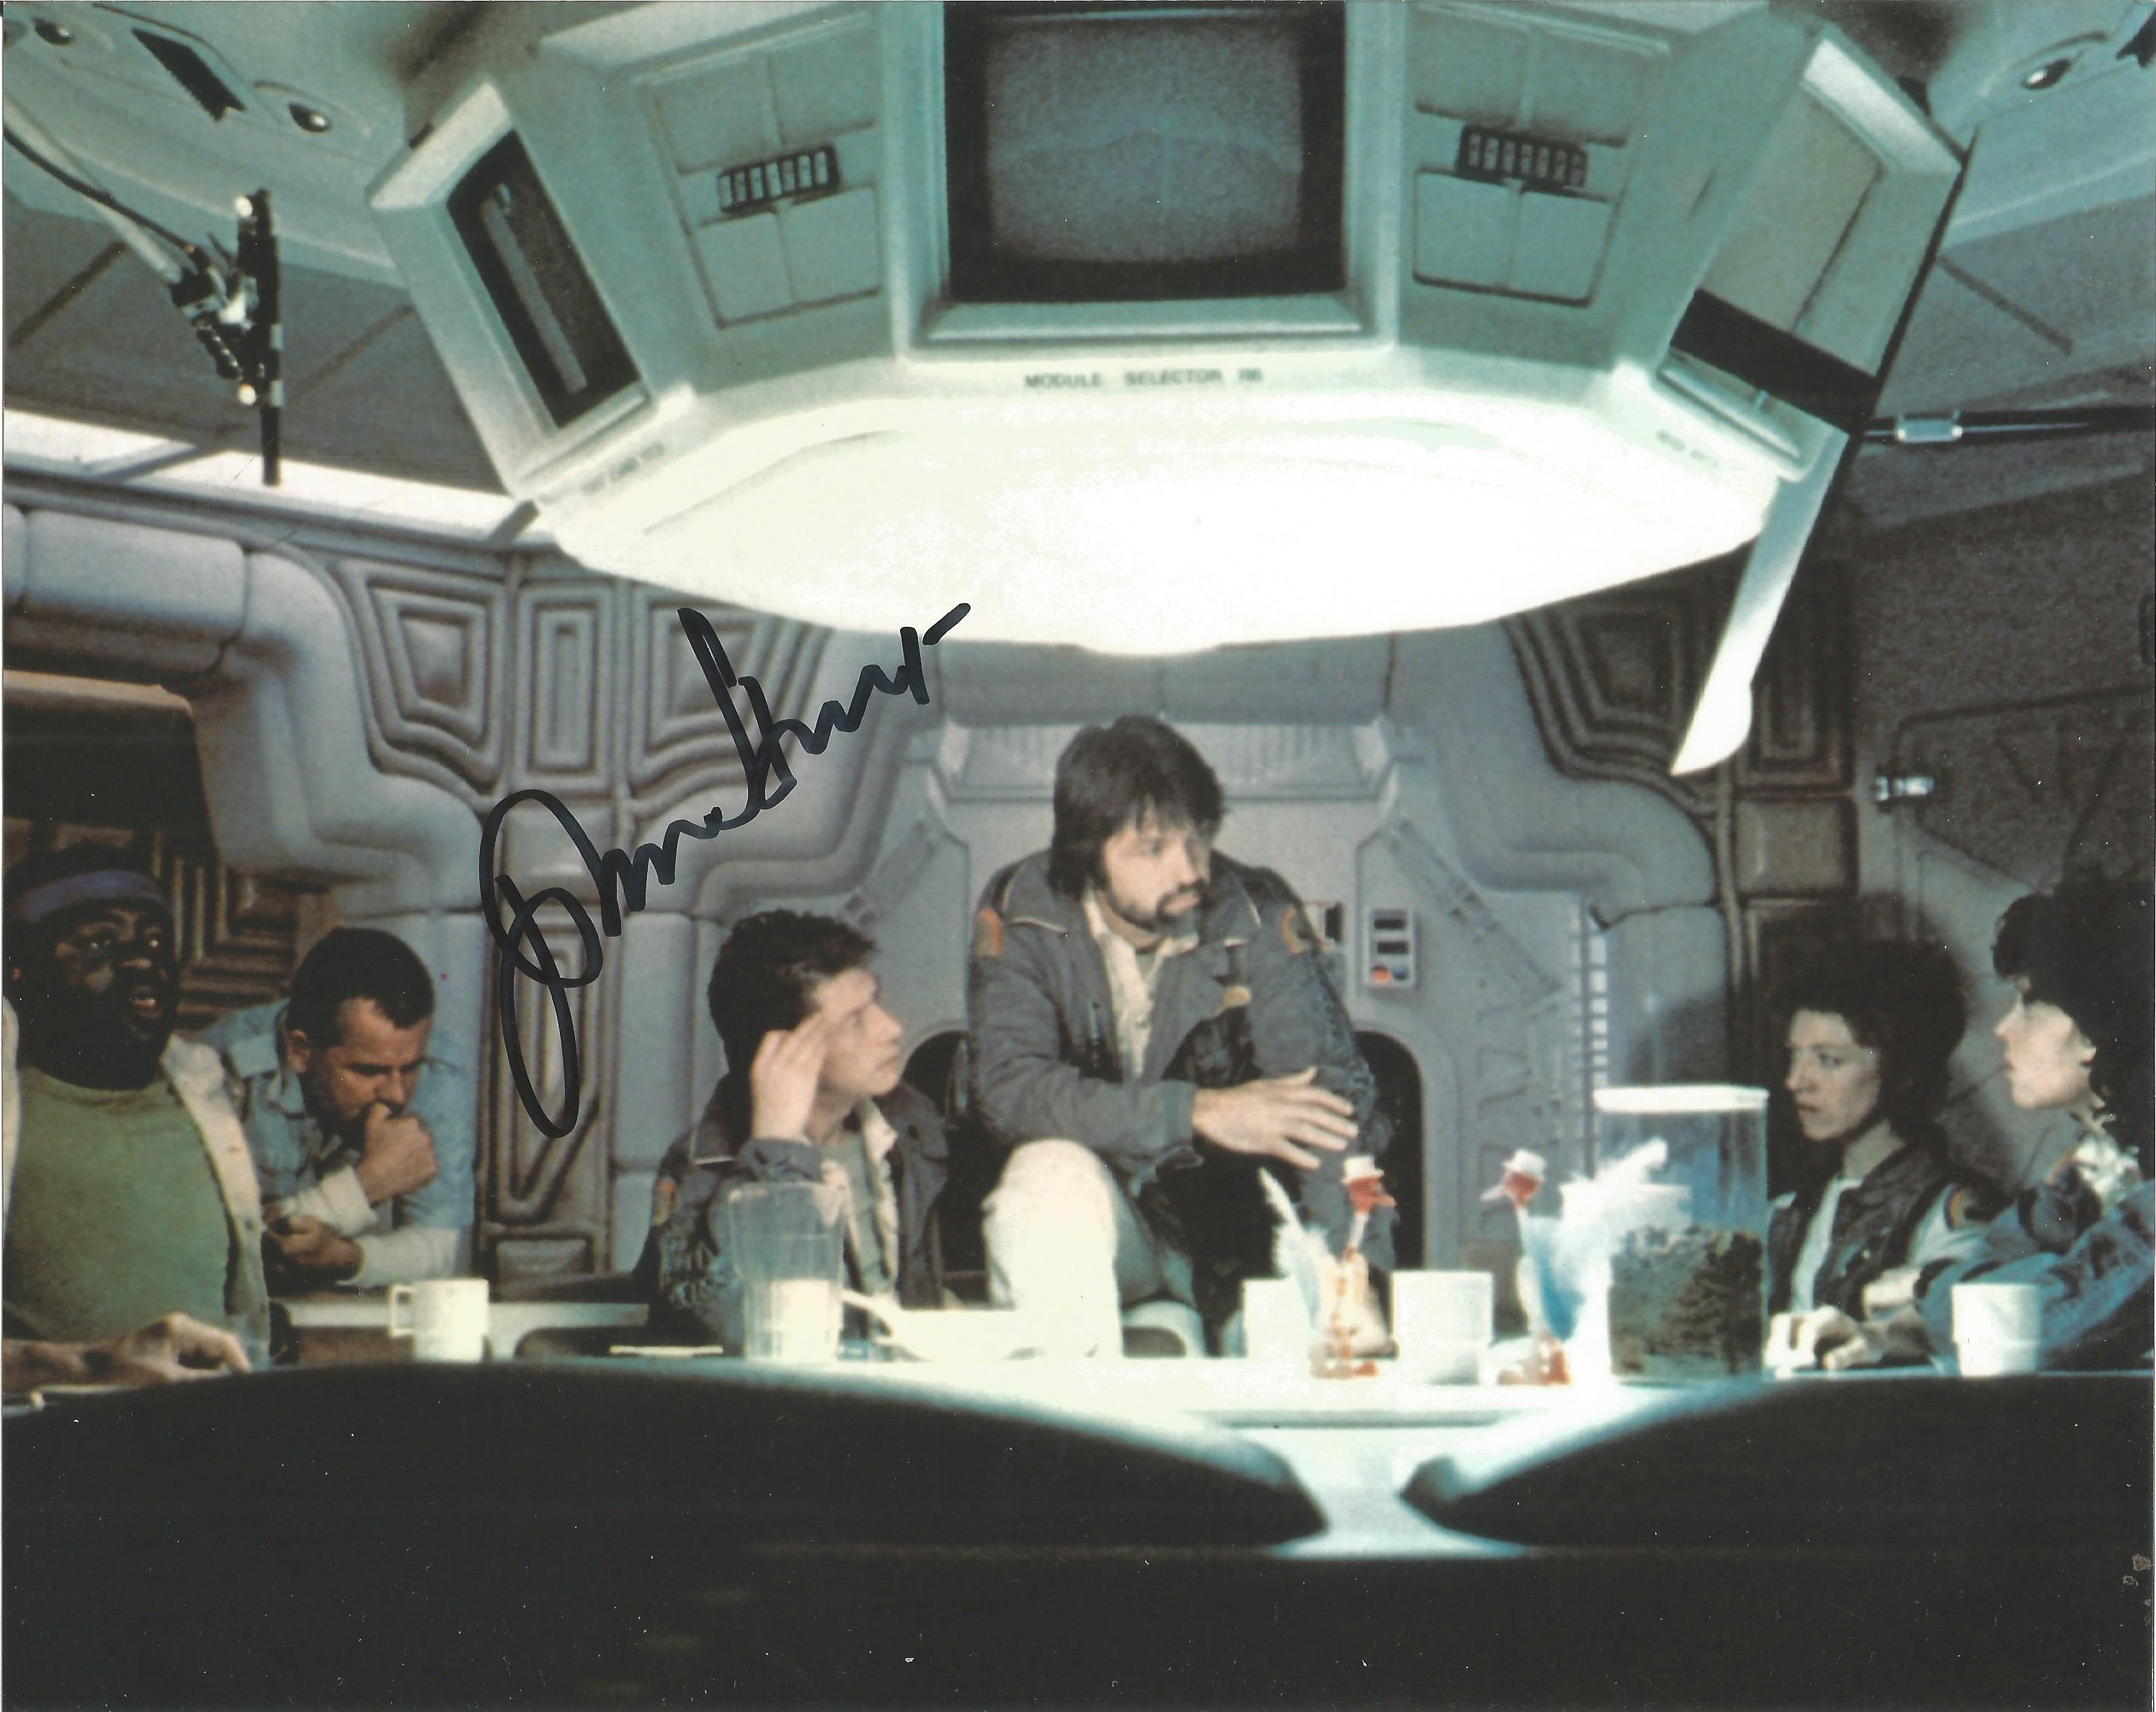 John Hurt d Alien hand signed 10 x 8 inch photo. This beautiful hand-signed photo depicts John